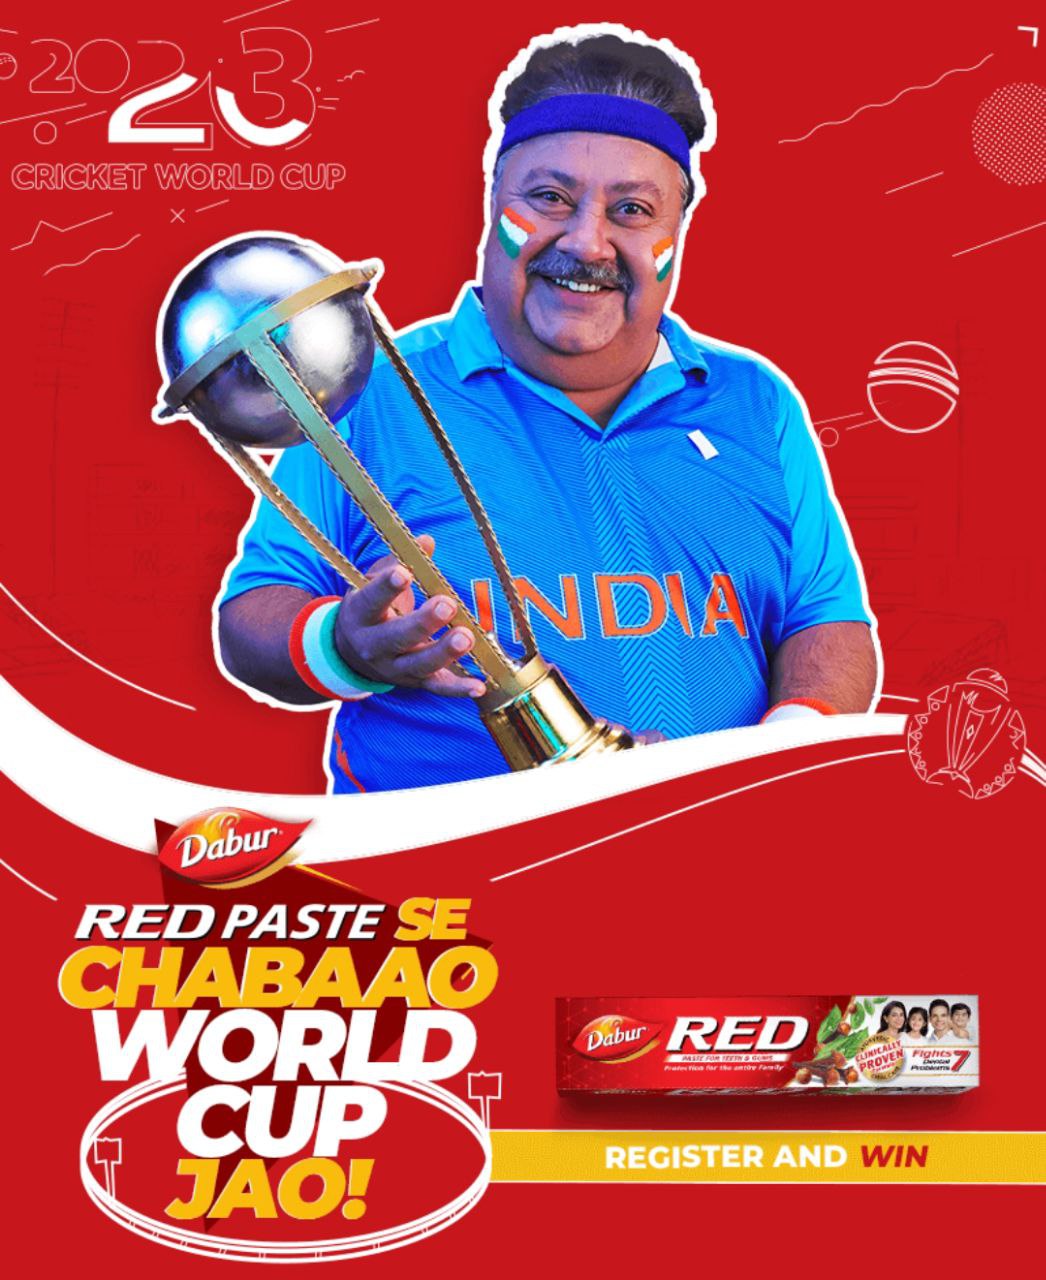 Dabur Red Paste's "Chabao or World Cup Jaao" Contest